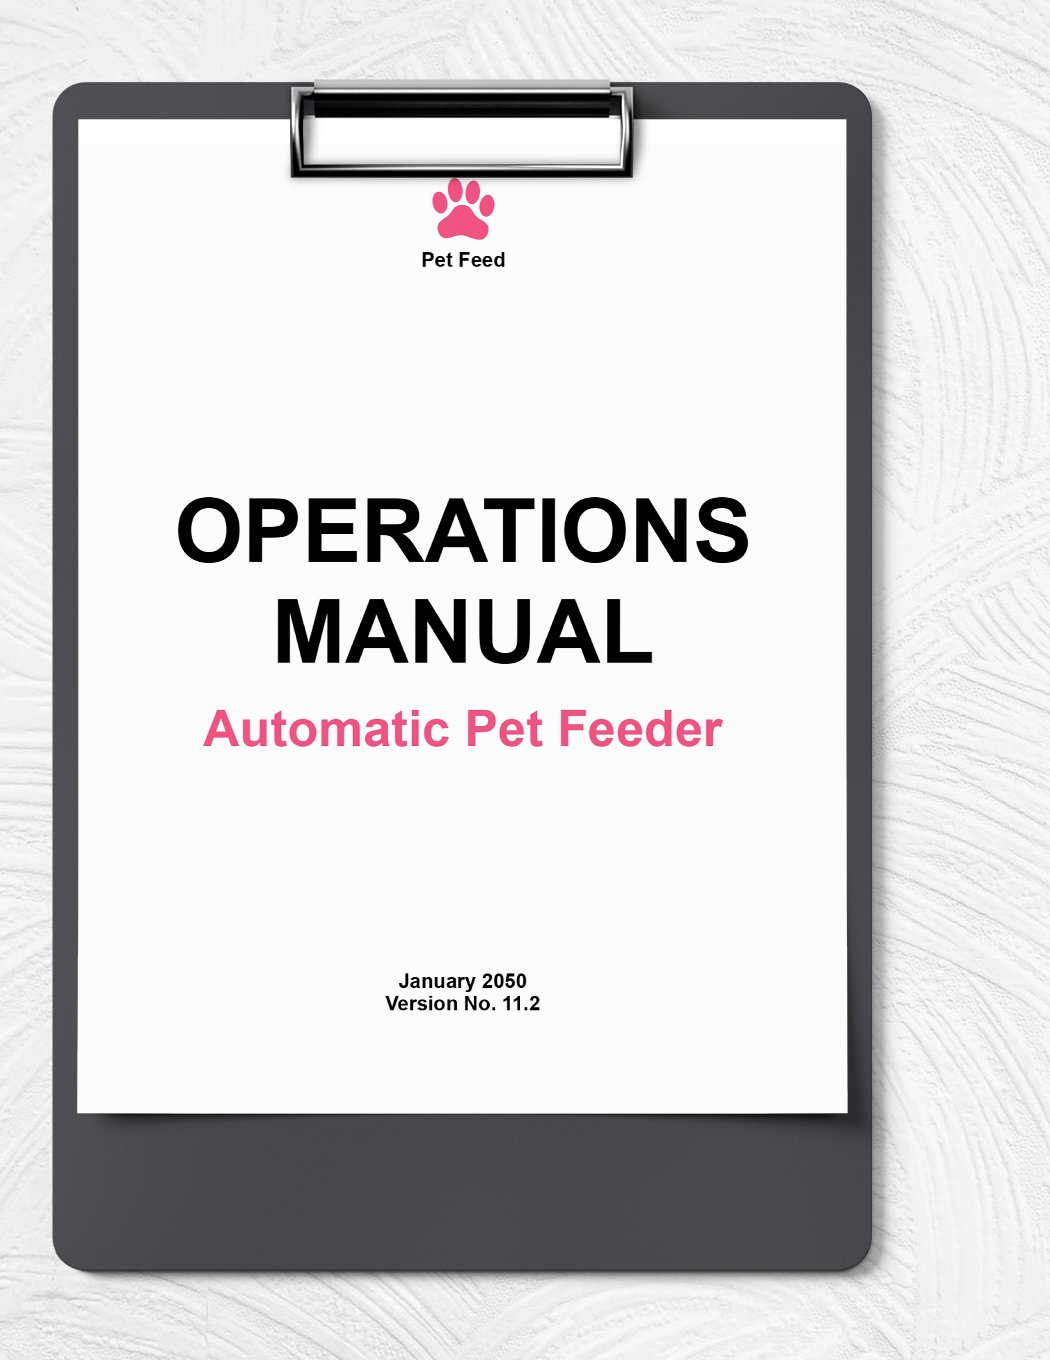 Operations Manual Template